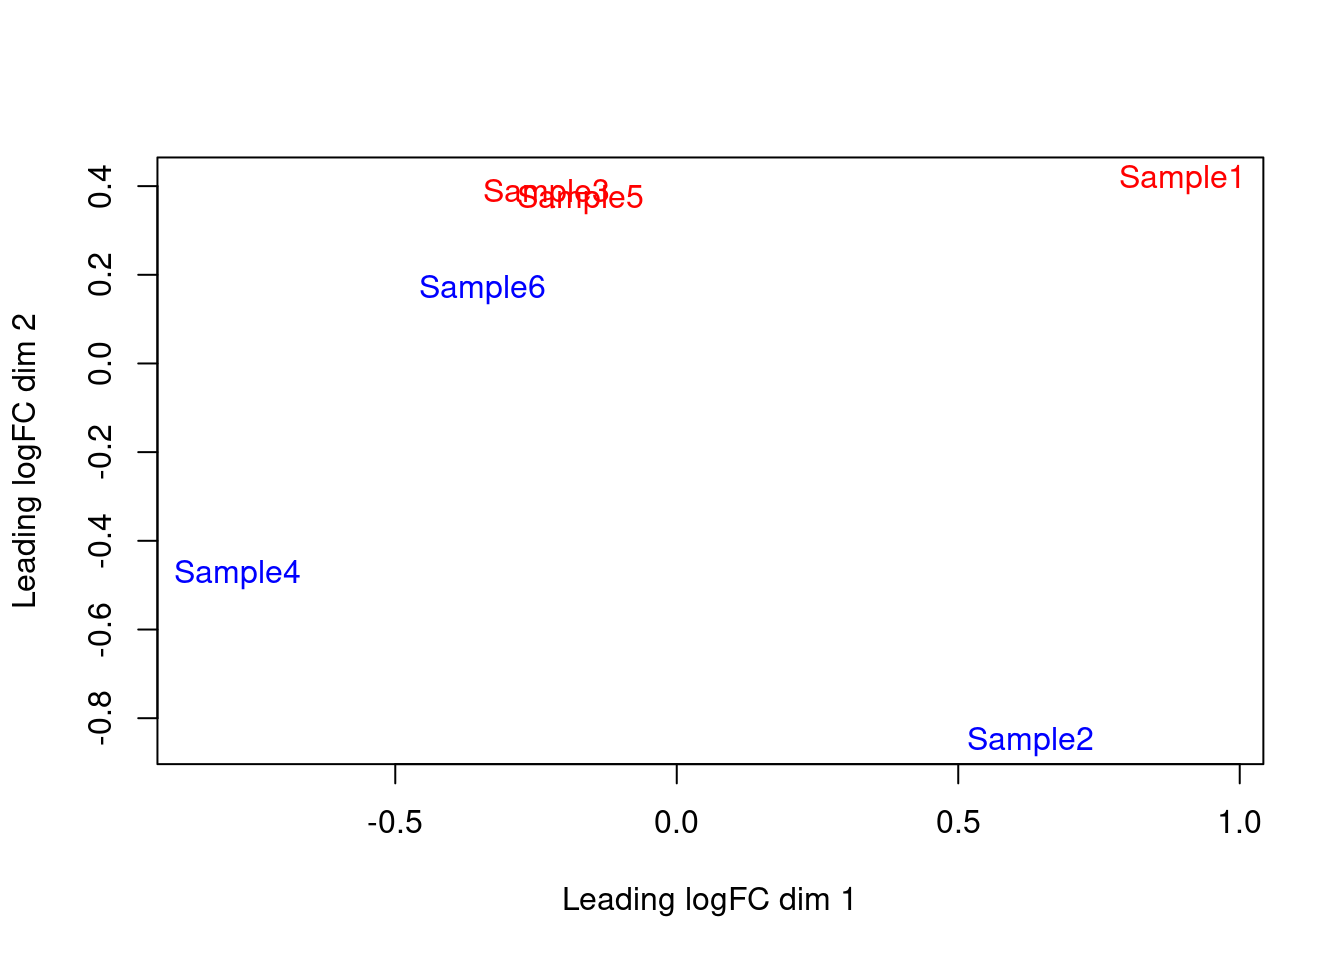 MDS plot of the pseudo-bulk log-normalized CPMs, where each point represents a sample and is colored by the tomato status.